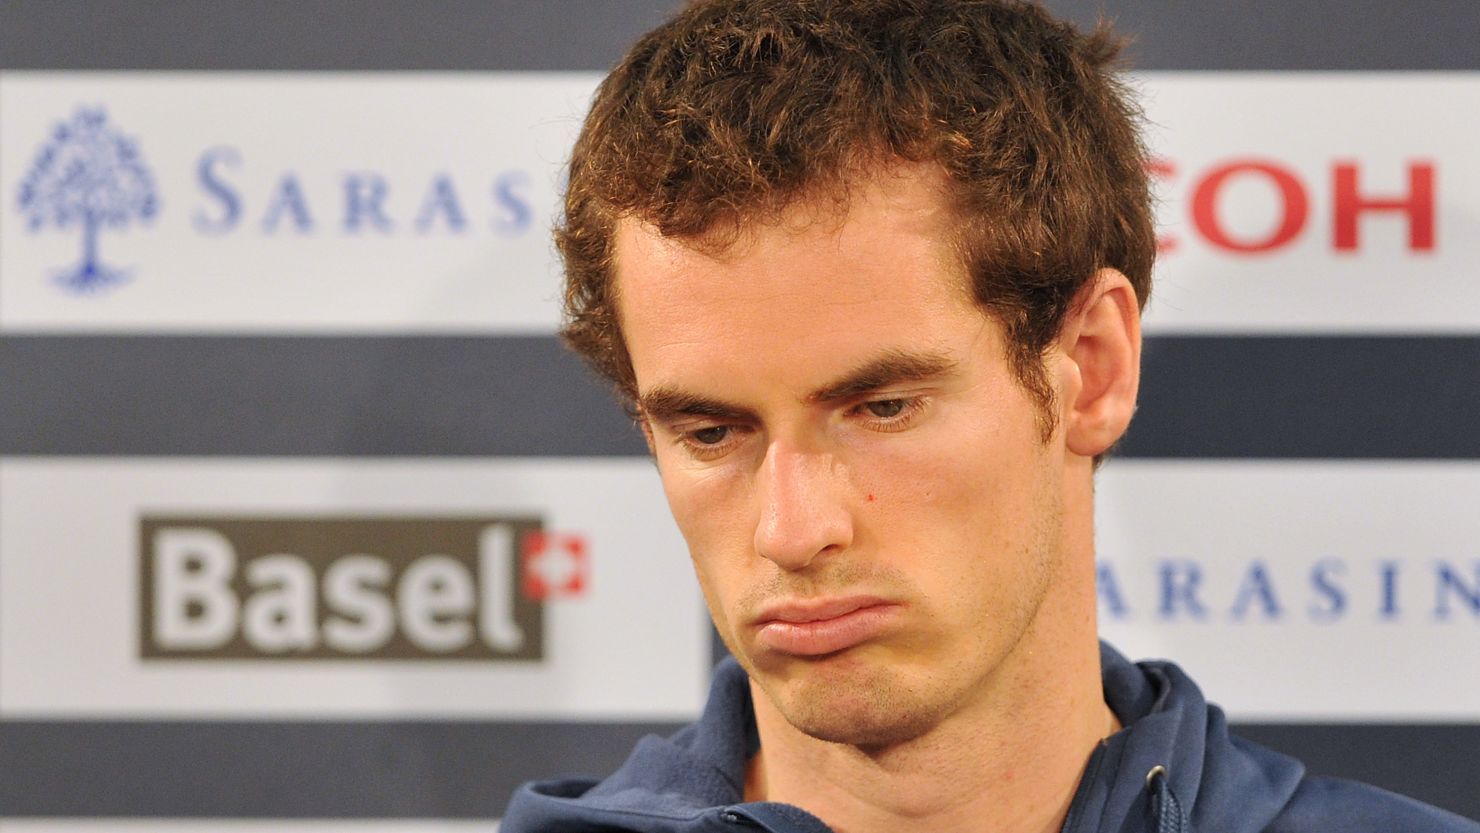 Andy Murray looks dejected as he announces his withdrawl from his first-round match at St. Jakobshalle.